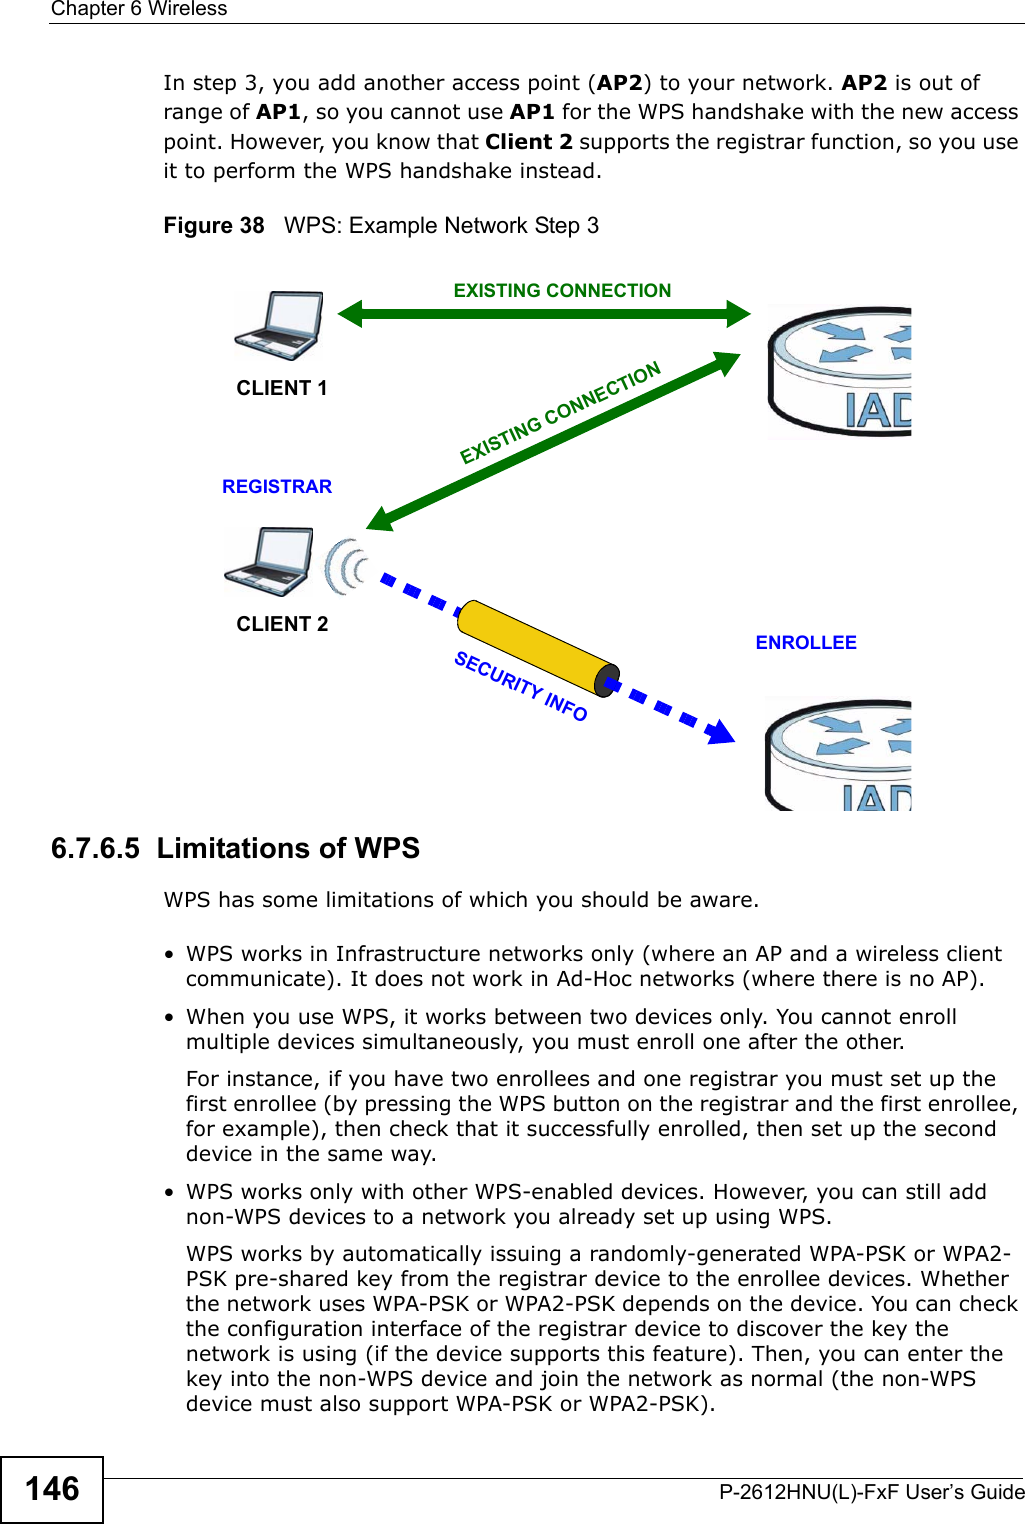 Chapter 6 WirelessP-2612HNU(L)-FxF User’s Guide146In step 3, you add another access point (AP2) to your network. AP2 is out of range of AP1, so you cannot use AP1 for the WPS handshake with the new access point. However, you know that Client 2 supports the registrar function, so you use it to perform the WPS handshake instead.Figure 38   WPS: Example Network Step 36.7.6.5  Limitations of WPSWPS has some limitations of which you should be aware. • WPS works in Infrastructure networks only (where an AP and a wireless client communicate). It does not work in Ad-Hoc networks (where there is no AP).• When you use WPS, it works between two devices only. You cannot enroll multiple devices simultaneously, you must enroll one after the other.For instance, if you have two enrollees and one registrar you must set up the first enrollee (by pressing the WPS button on the registrar and the first enrollee,for example), then check that it successfully enrolled, then set up the second device in the same way.• WPS works only with other WPS-enabled devices. However, you can still add non-WPS devices to a network you already set up using WPS.WPS works by automatically issuing a randomly-generated WPA-PSK or WPA2-PSK pre-shared key from the registrar device to the enrollee devices. Whether the network uses WPA-PSK or WPA2-PSK depends on the device. You can check the configuration interface of the registrar device to discover the key the network is using (if the device supports this feature). Then, you can enter the key into the non-WPS device and join the network as normal (the non-WPS device must also support WPA-PSK or WPA2-PSK).CLIENT 1 AP1REGISTRARCLIENT 2EXISTING CONNECTIONSECURITYINFOENROLLEEAP2EXISTINGCONNECTION